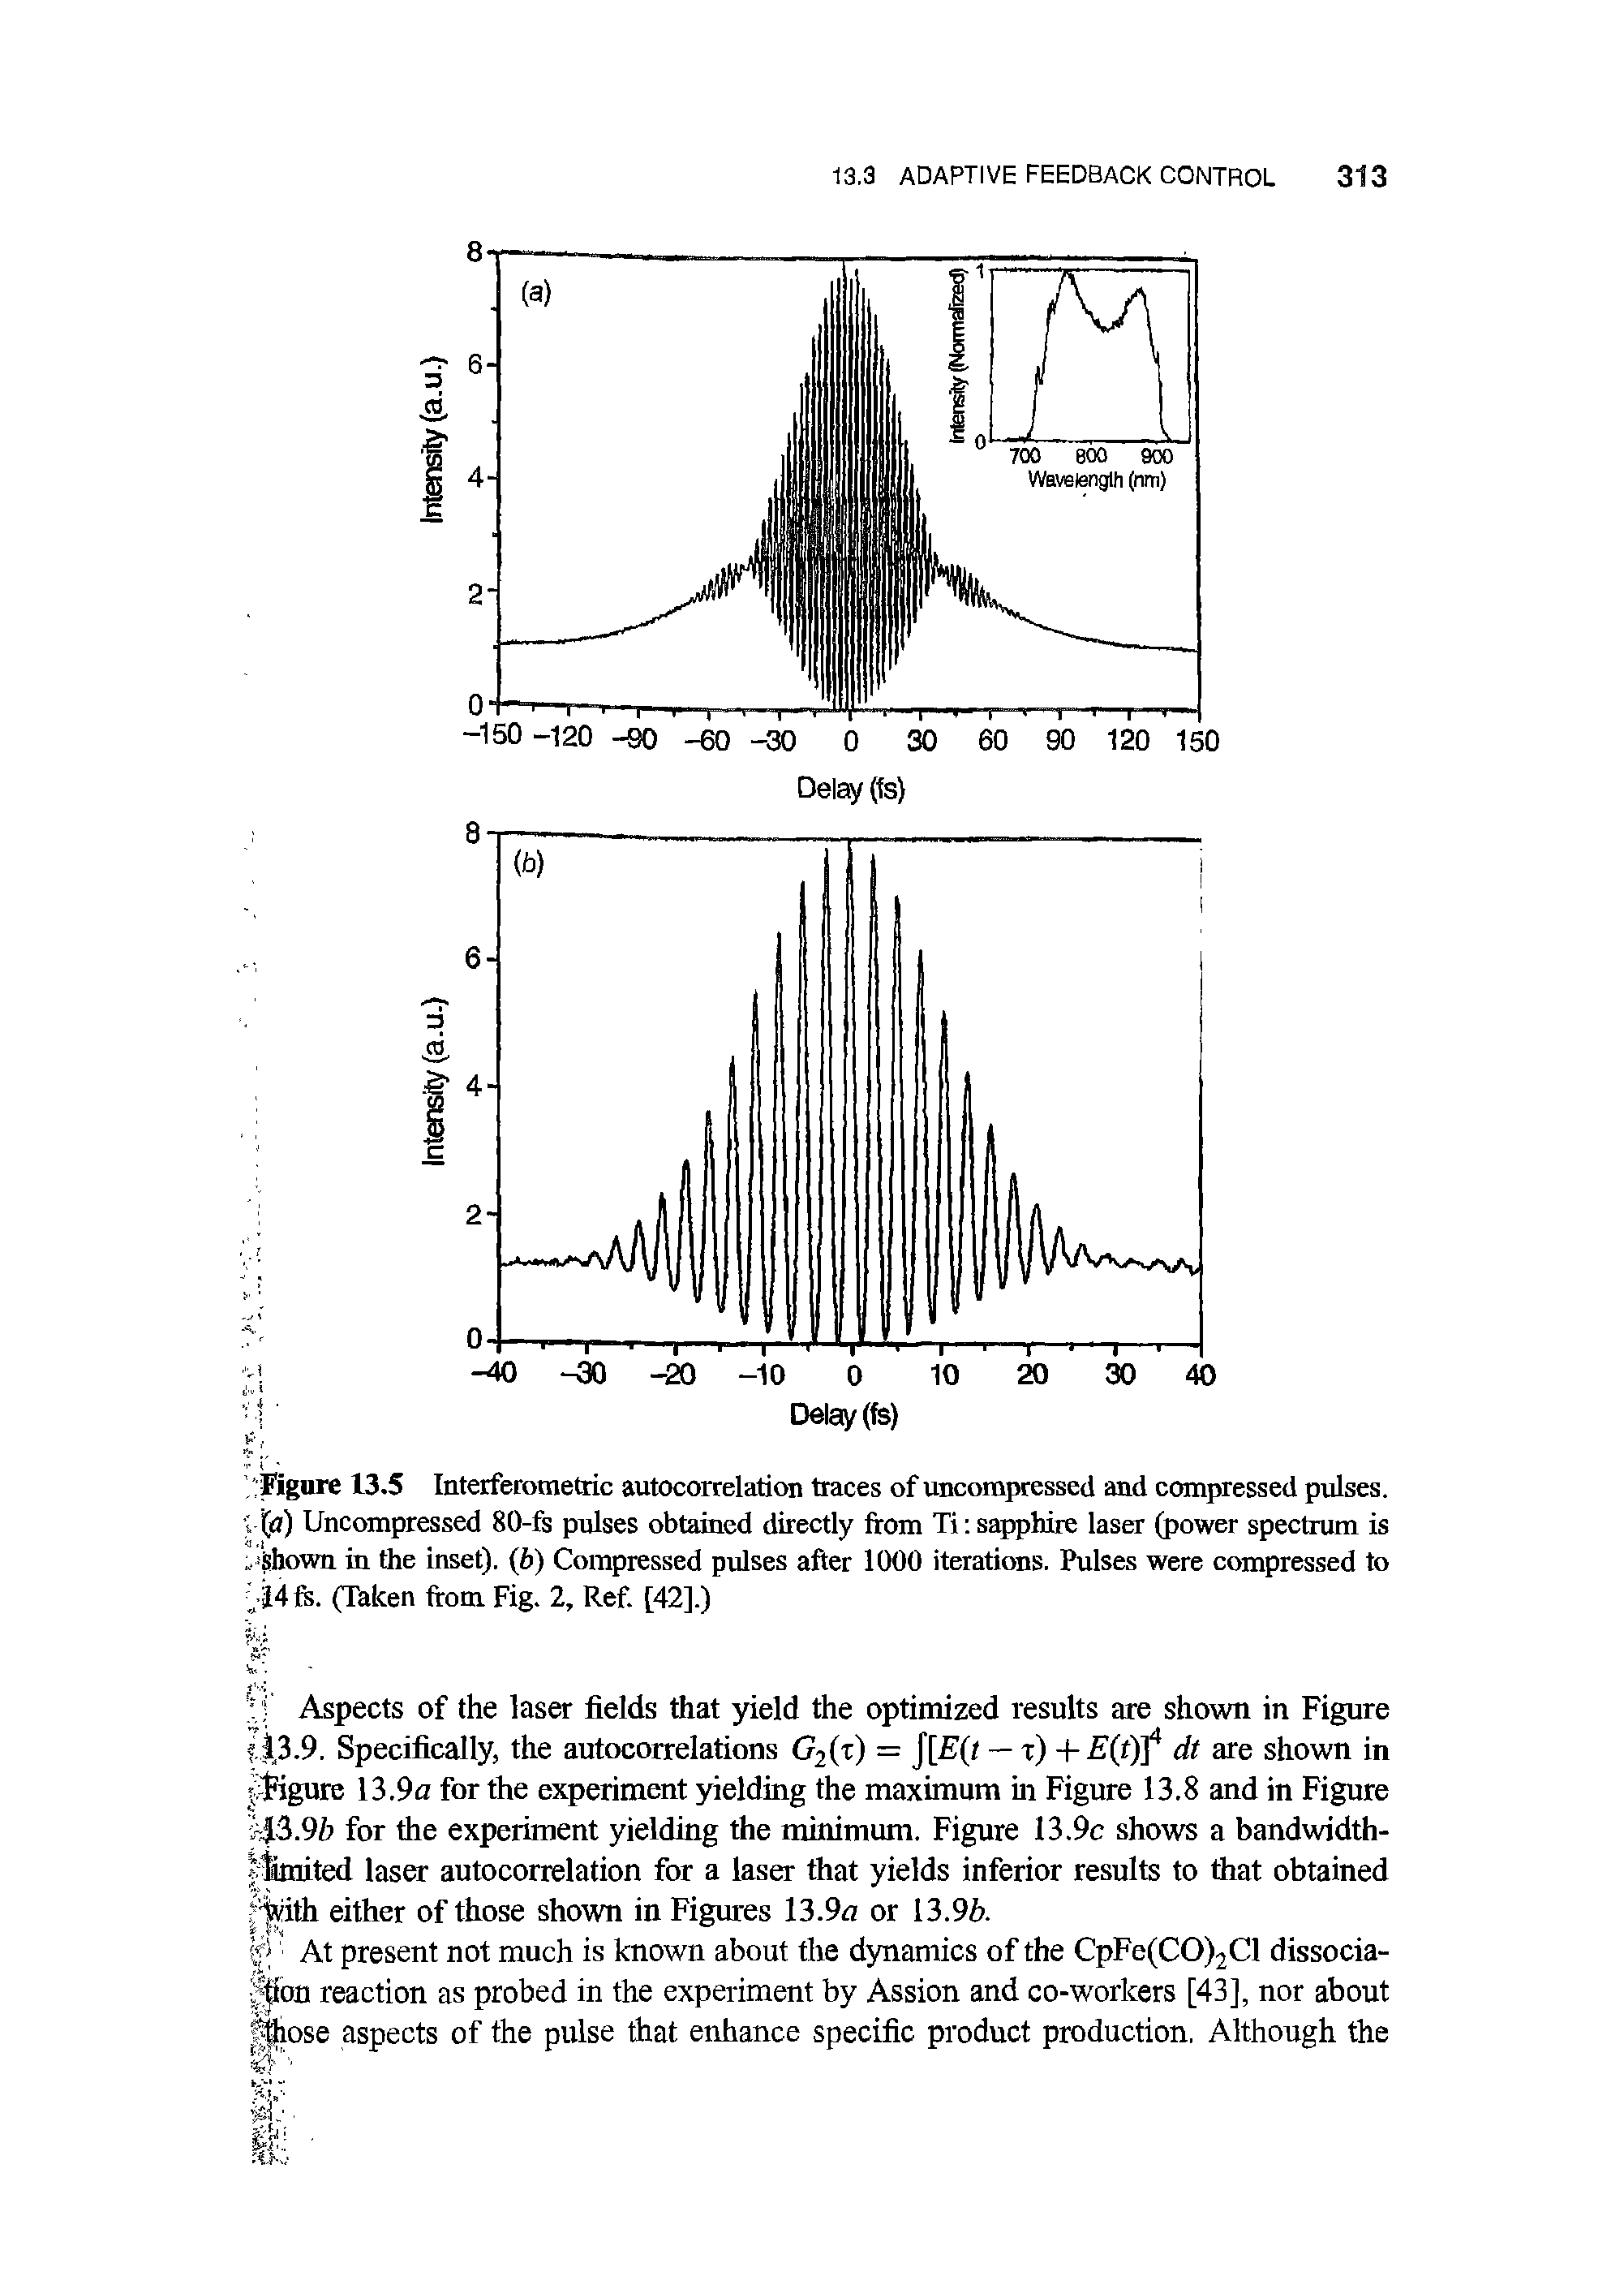 Figure 13.5 Interferometric autocorrelation traces of uncompressed and compressed pulses. 1 (a) Uncompressed 80-fs pulses obtained directly from Ti sapphire laser (power spectrum is Shown in the inset), (b) Compressed pulses after 1000 iterations. Pulses were compressed to (Taken from Fig. 2, Ref. [42].)...